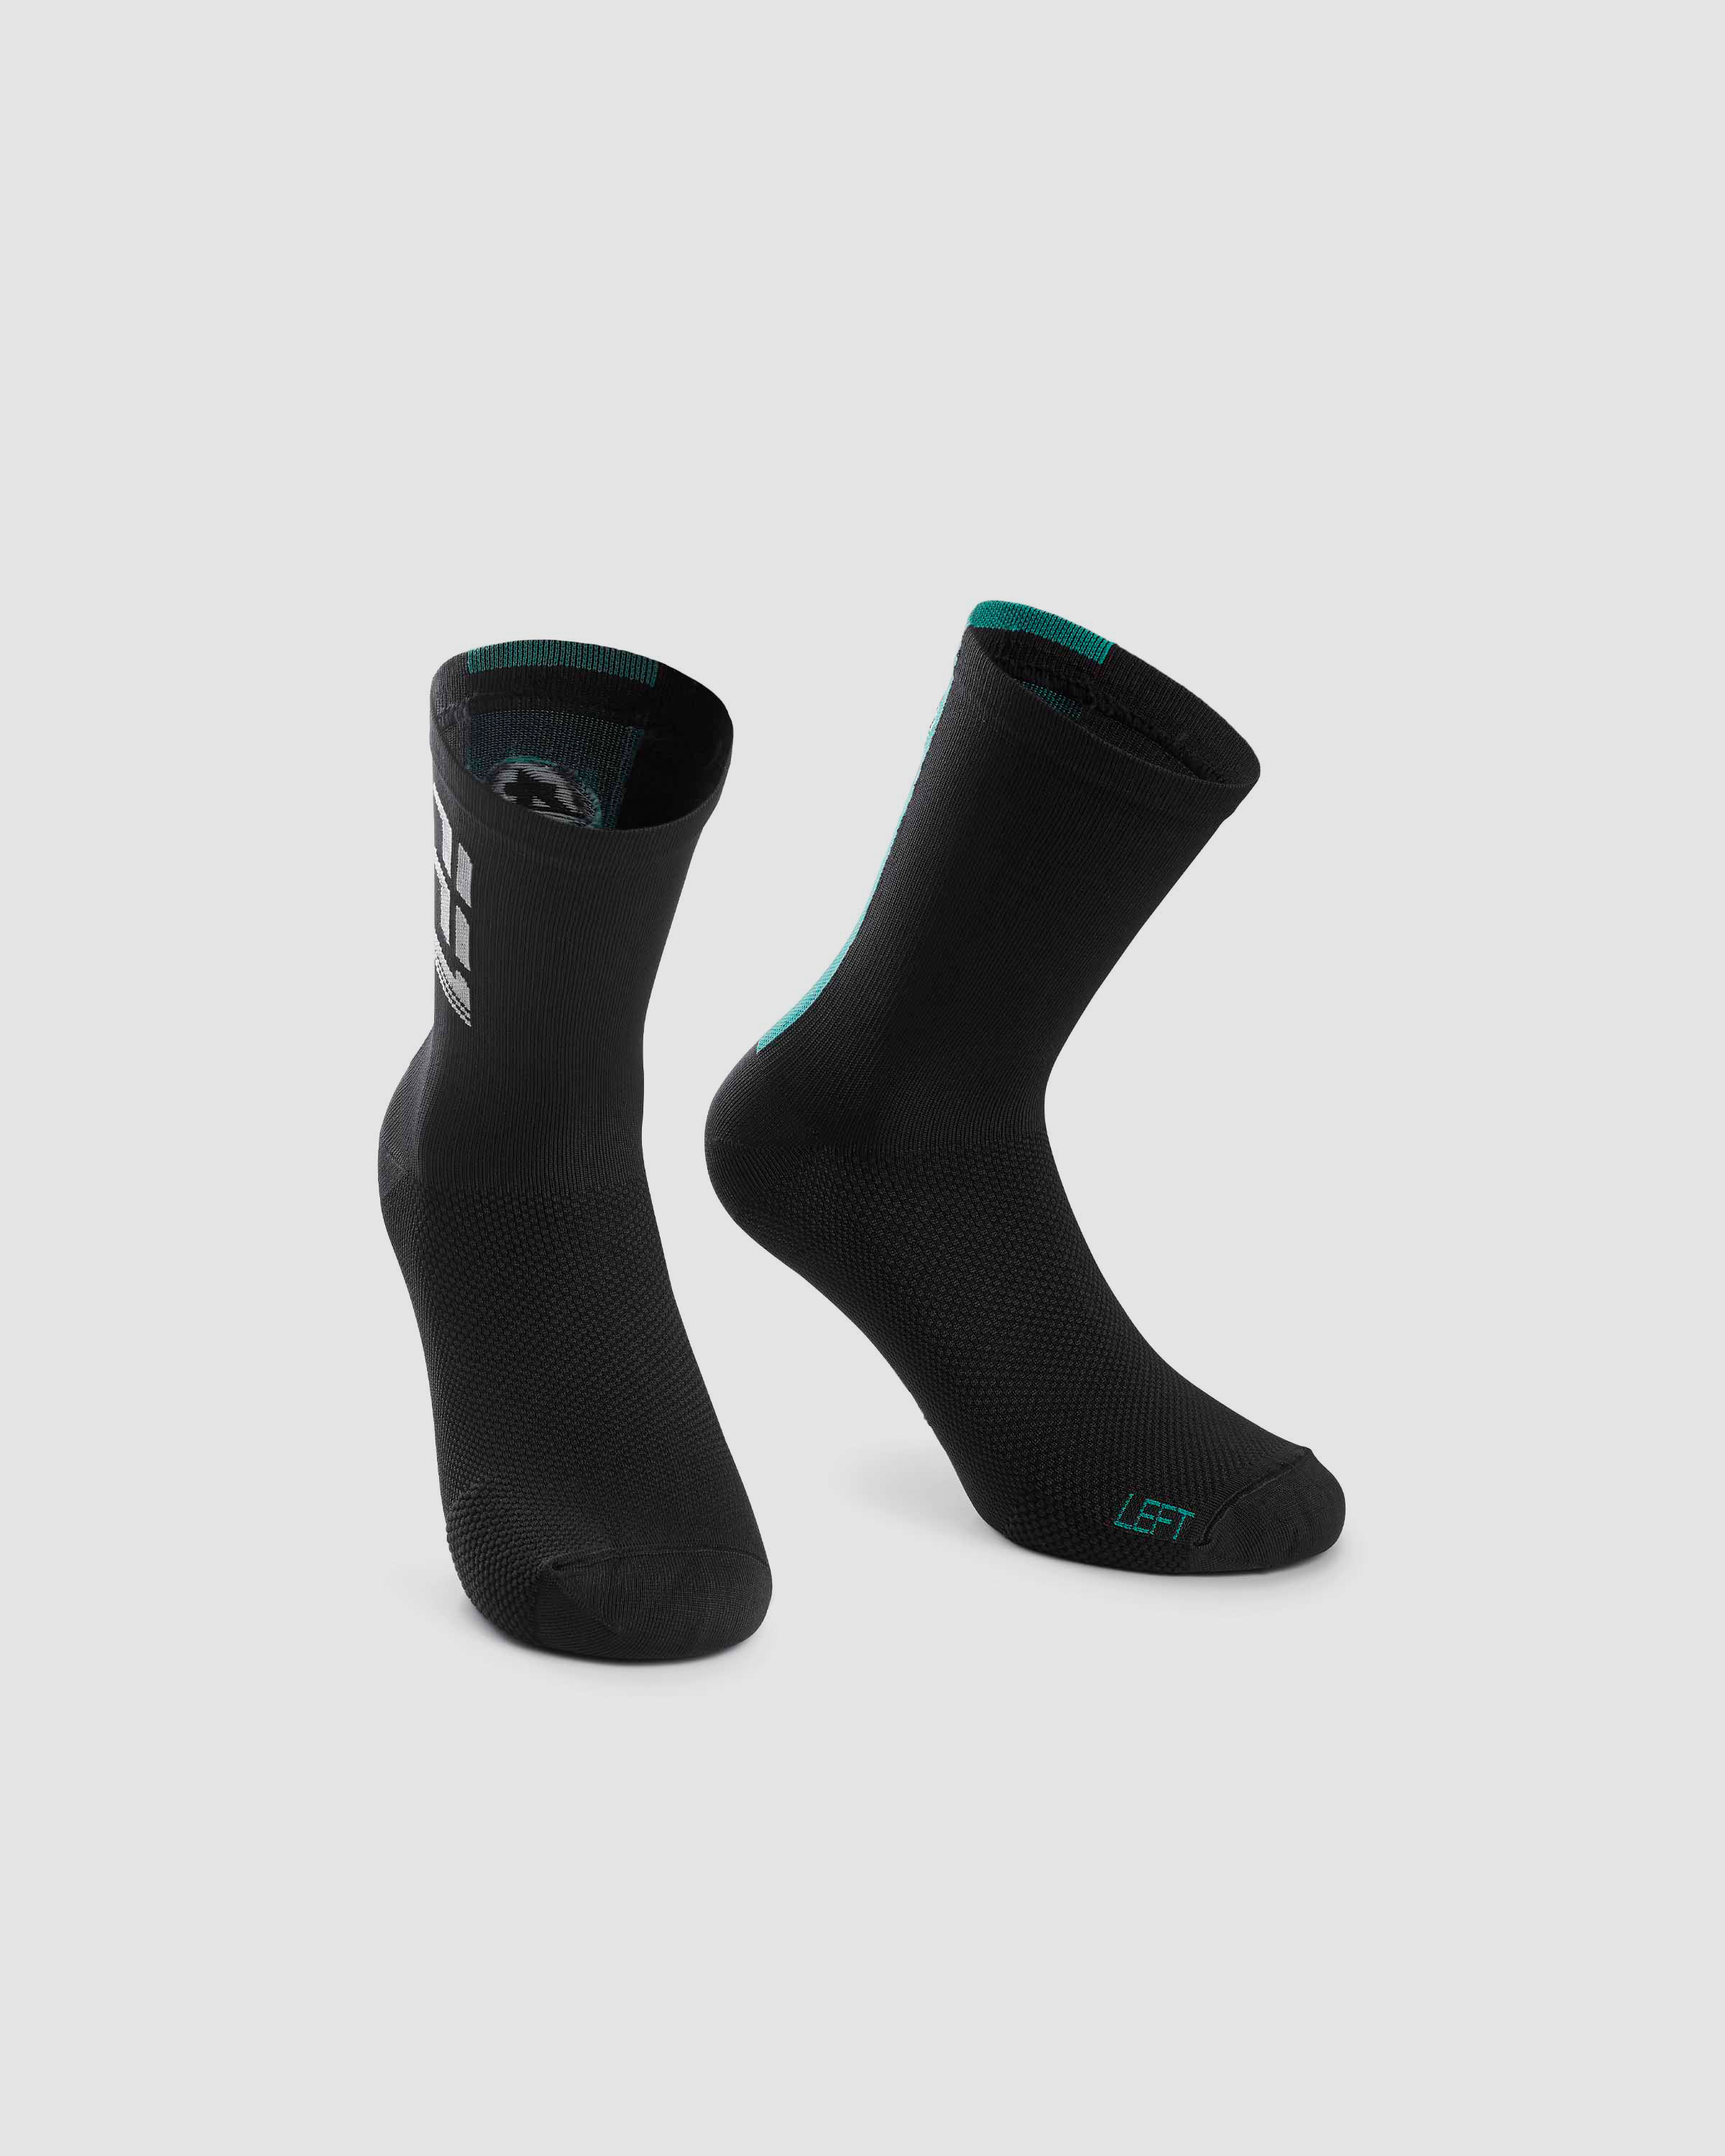 FF_1 Socks - ASSOS Of Switzerland - Official Outlet